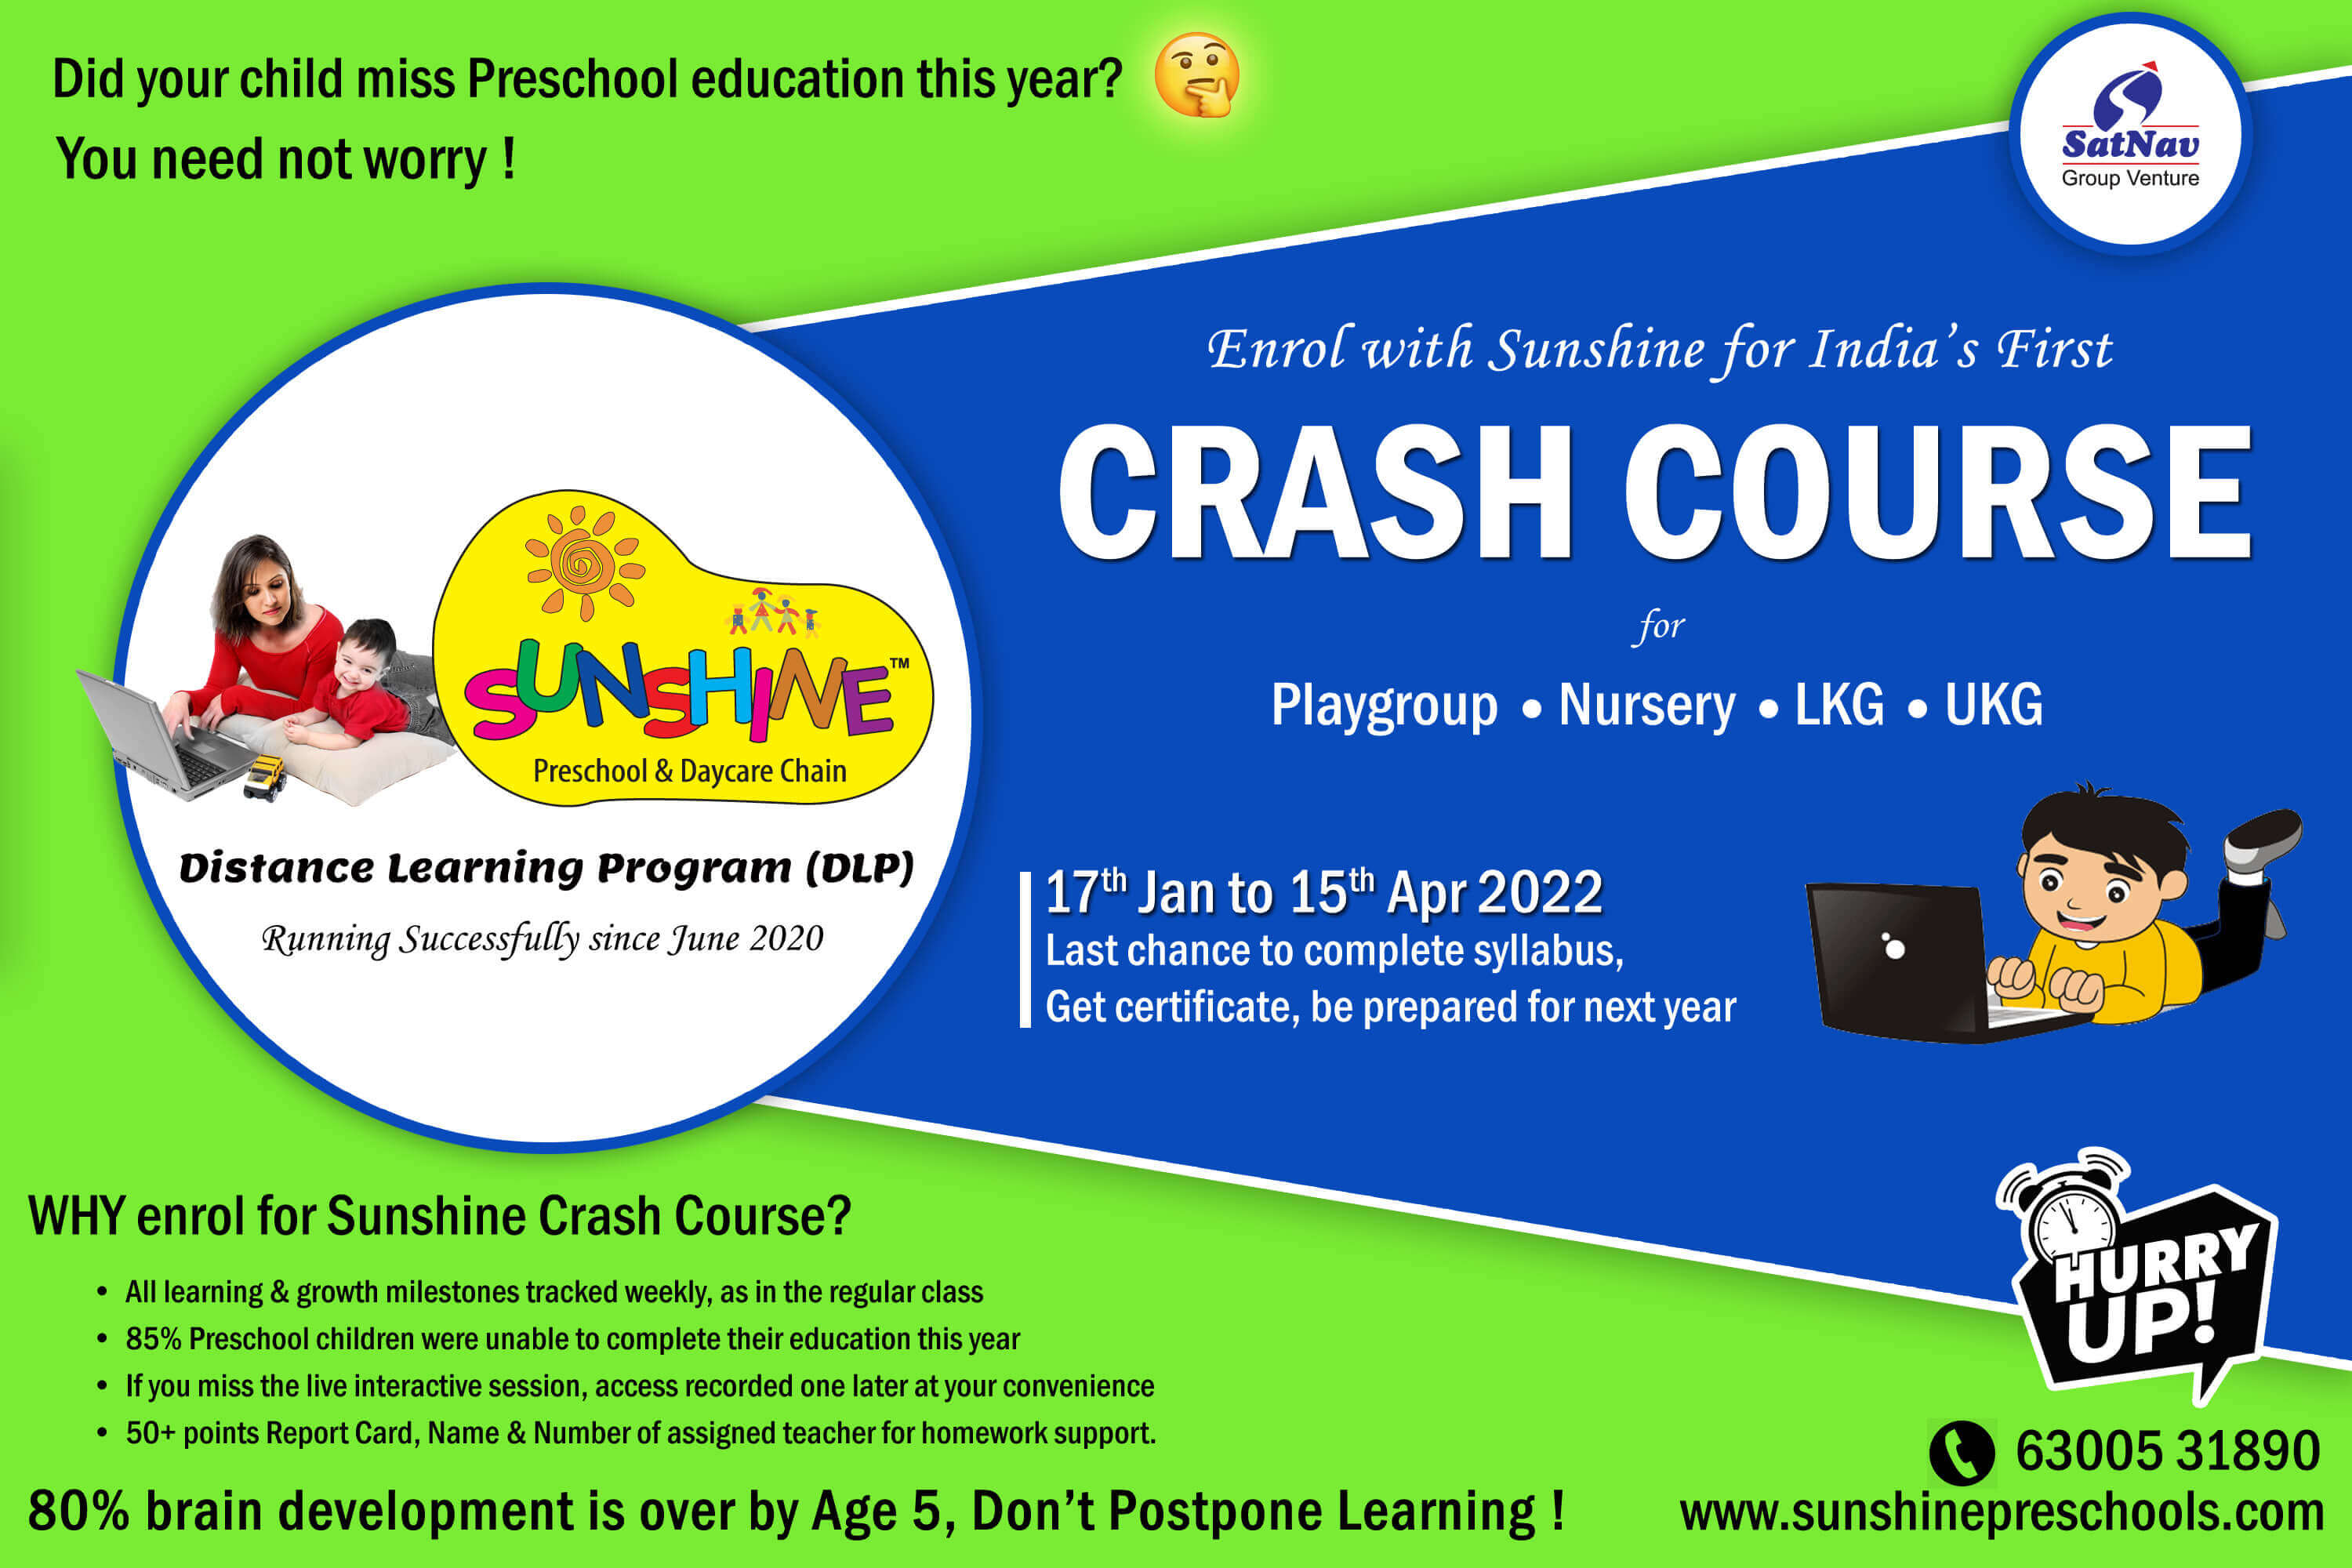 Online Preschool Crash Course for Kids to Recover the Lost Academic Year